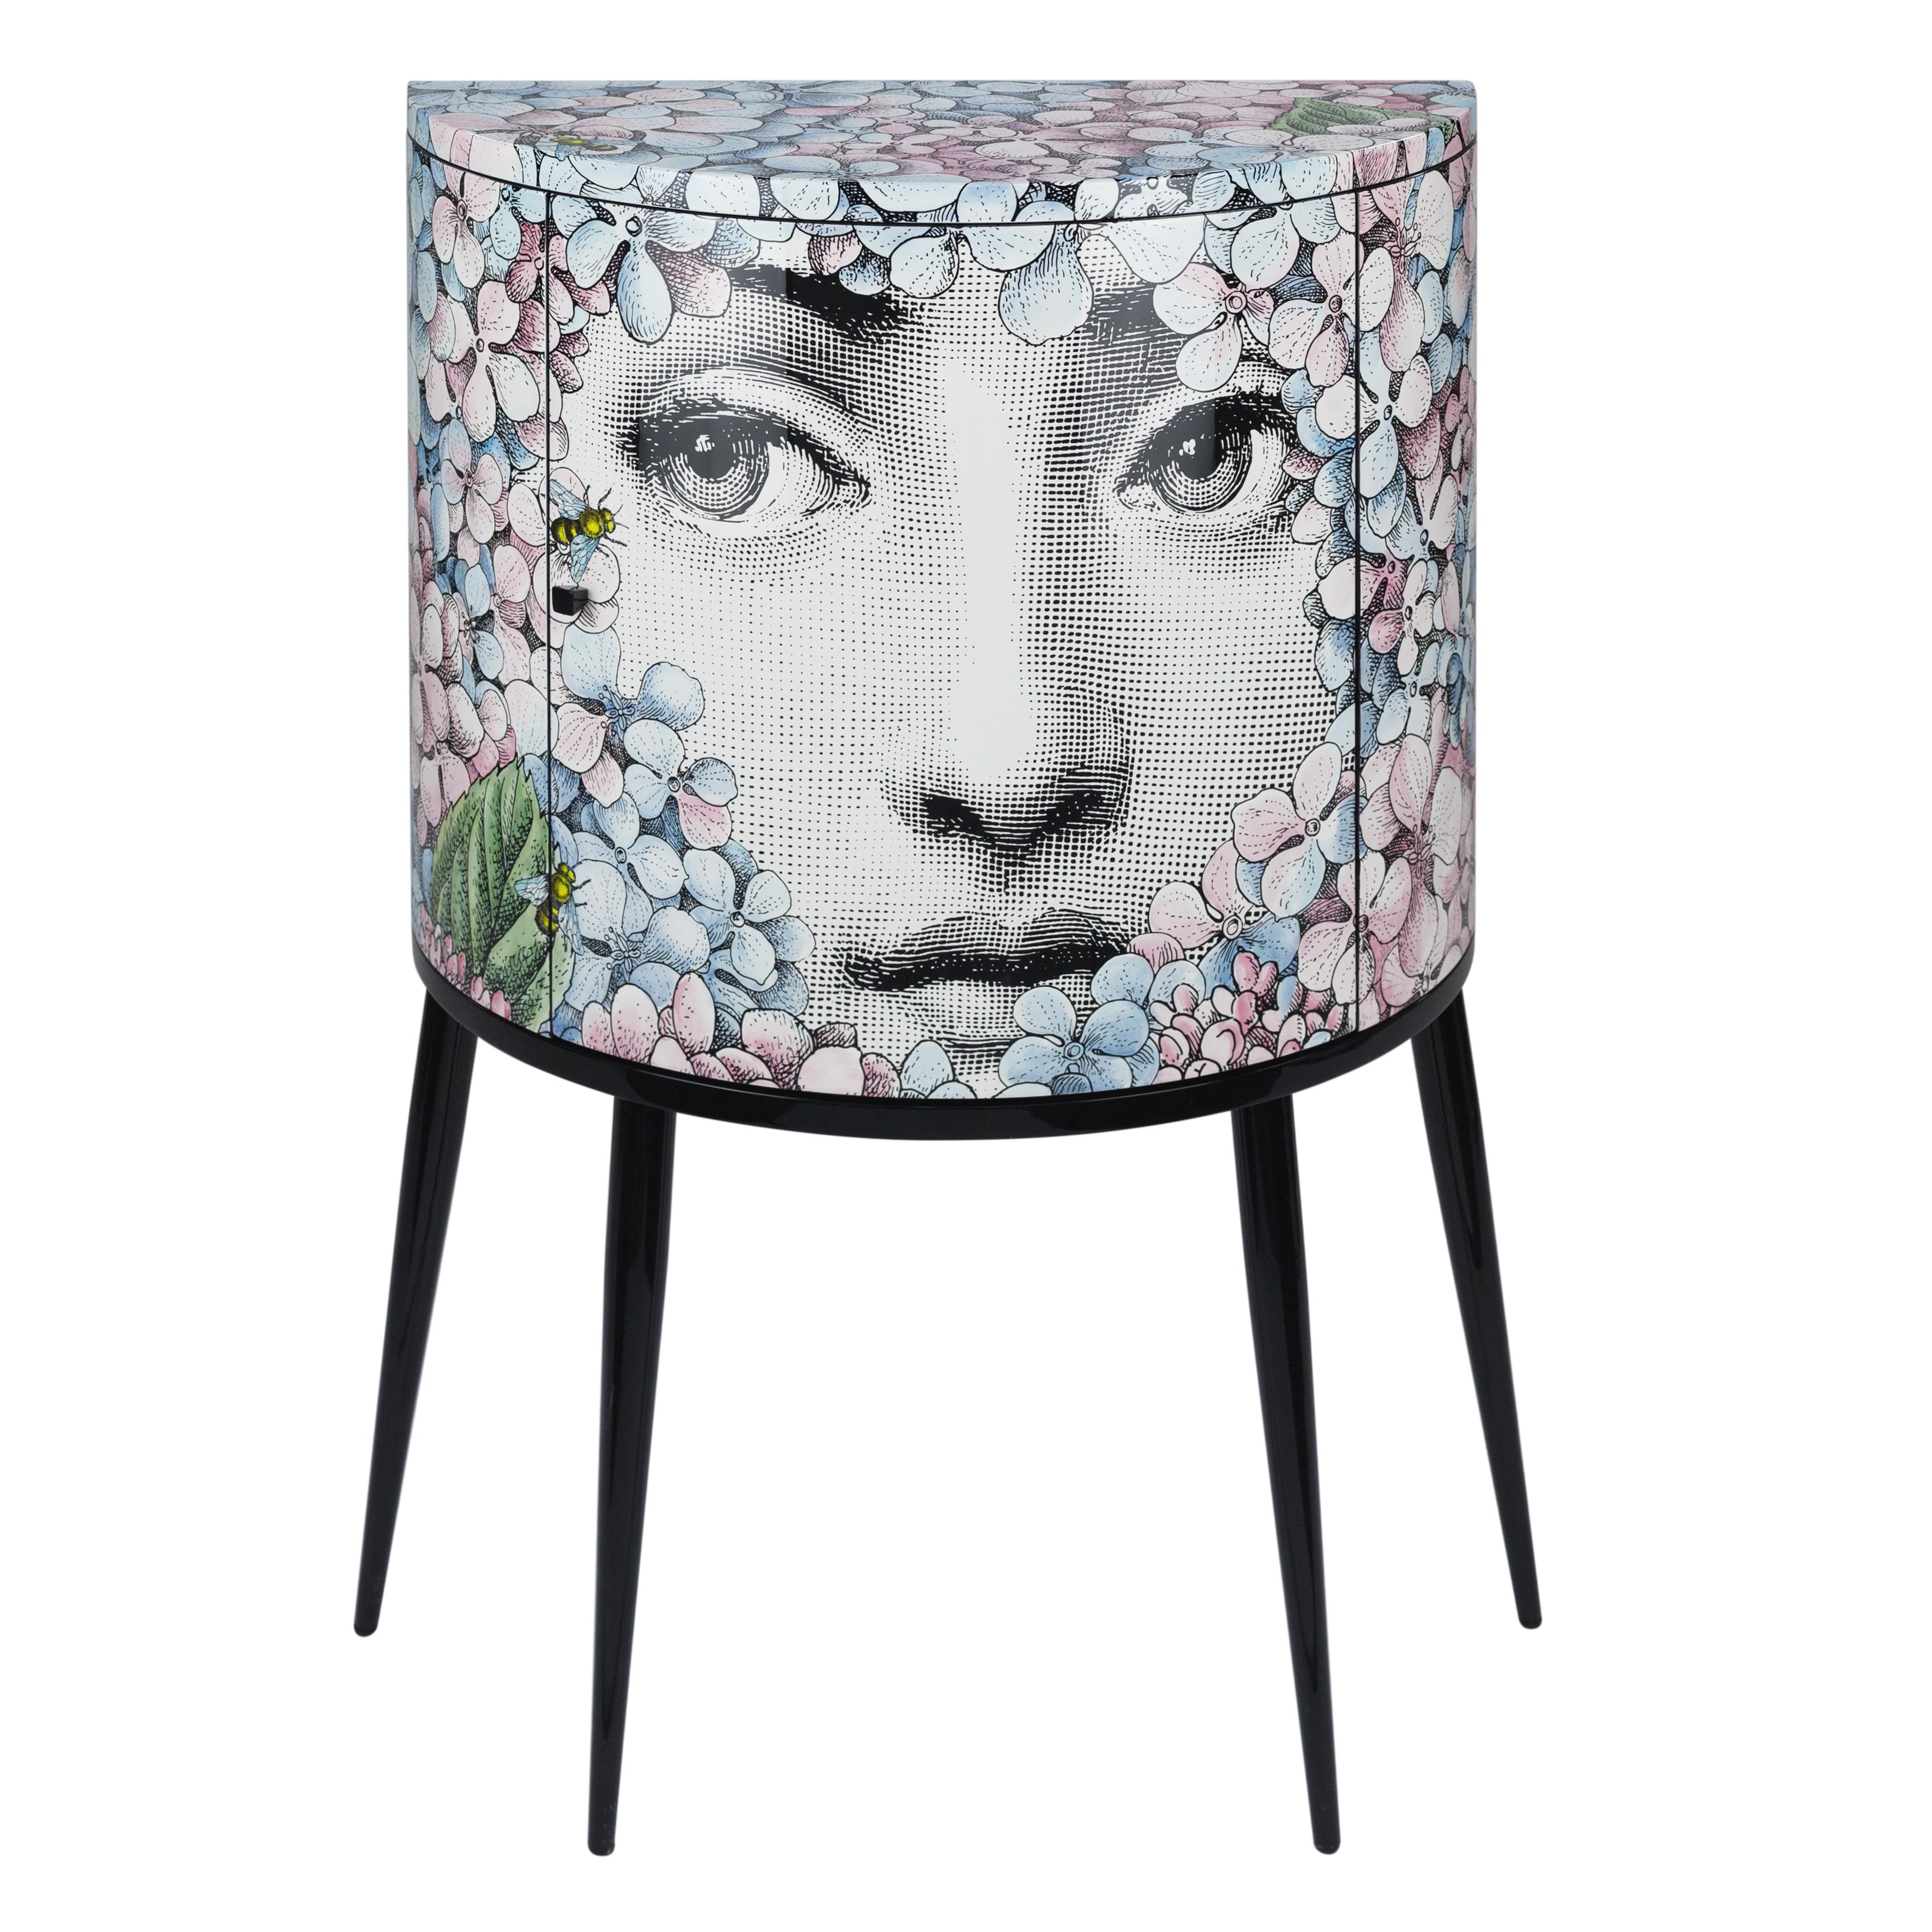 The consolle is handcrafted using original artisan techniques, like all Fornasetti pieces of furniture.
This consolle is silk-screened by hand, hand painted and covered with a smooth lacquer.

The decoration depicts a variation on the iconic face